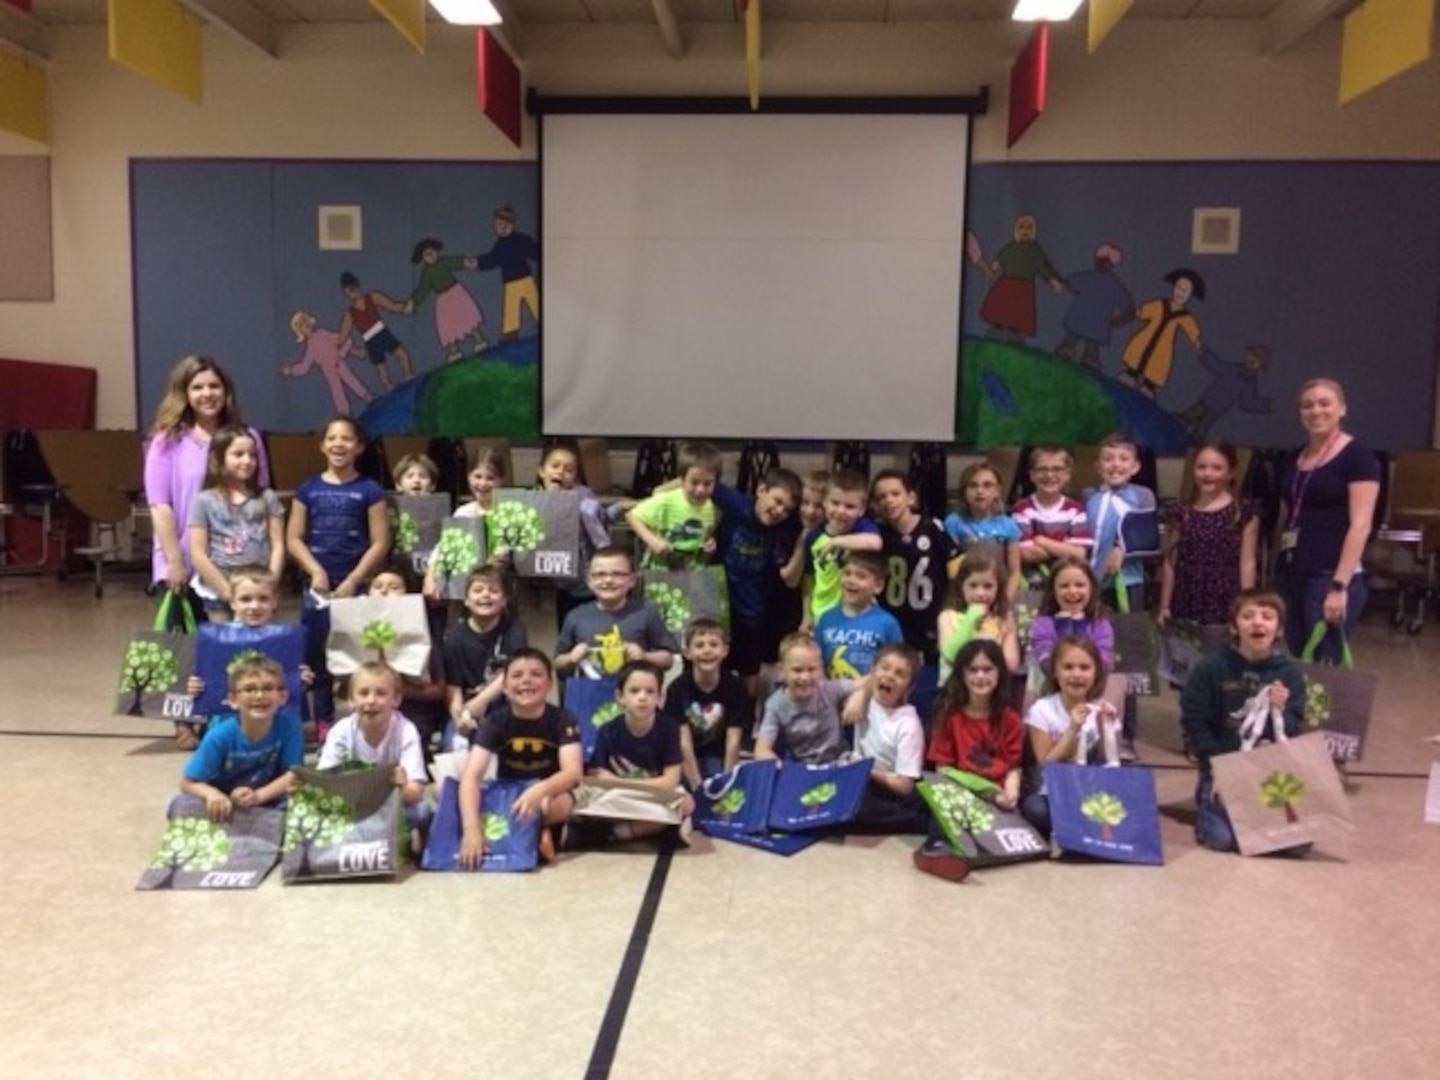 Students from Fairview Elementary pose with their new reusable bags after an Earth Day event hosted by Sarah Moor, environmental protection specialist with DLA Installation Support for Distribution.